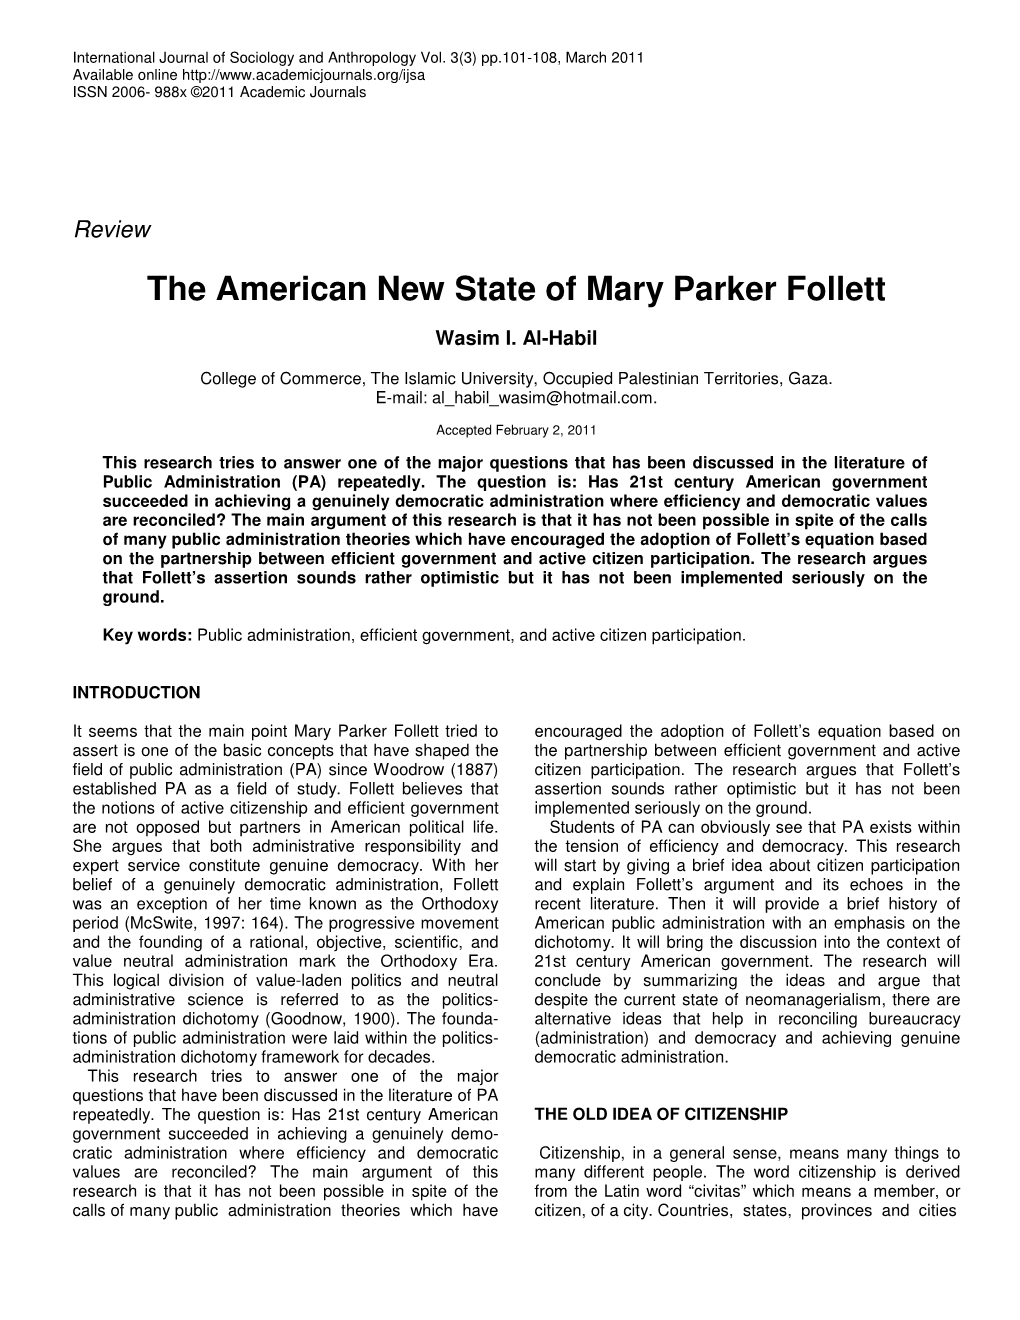 The American New State of Mary Parker Follett